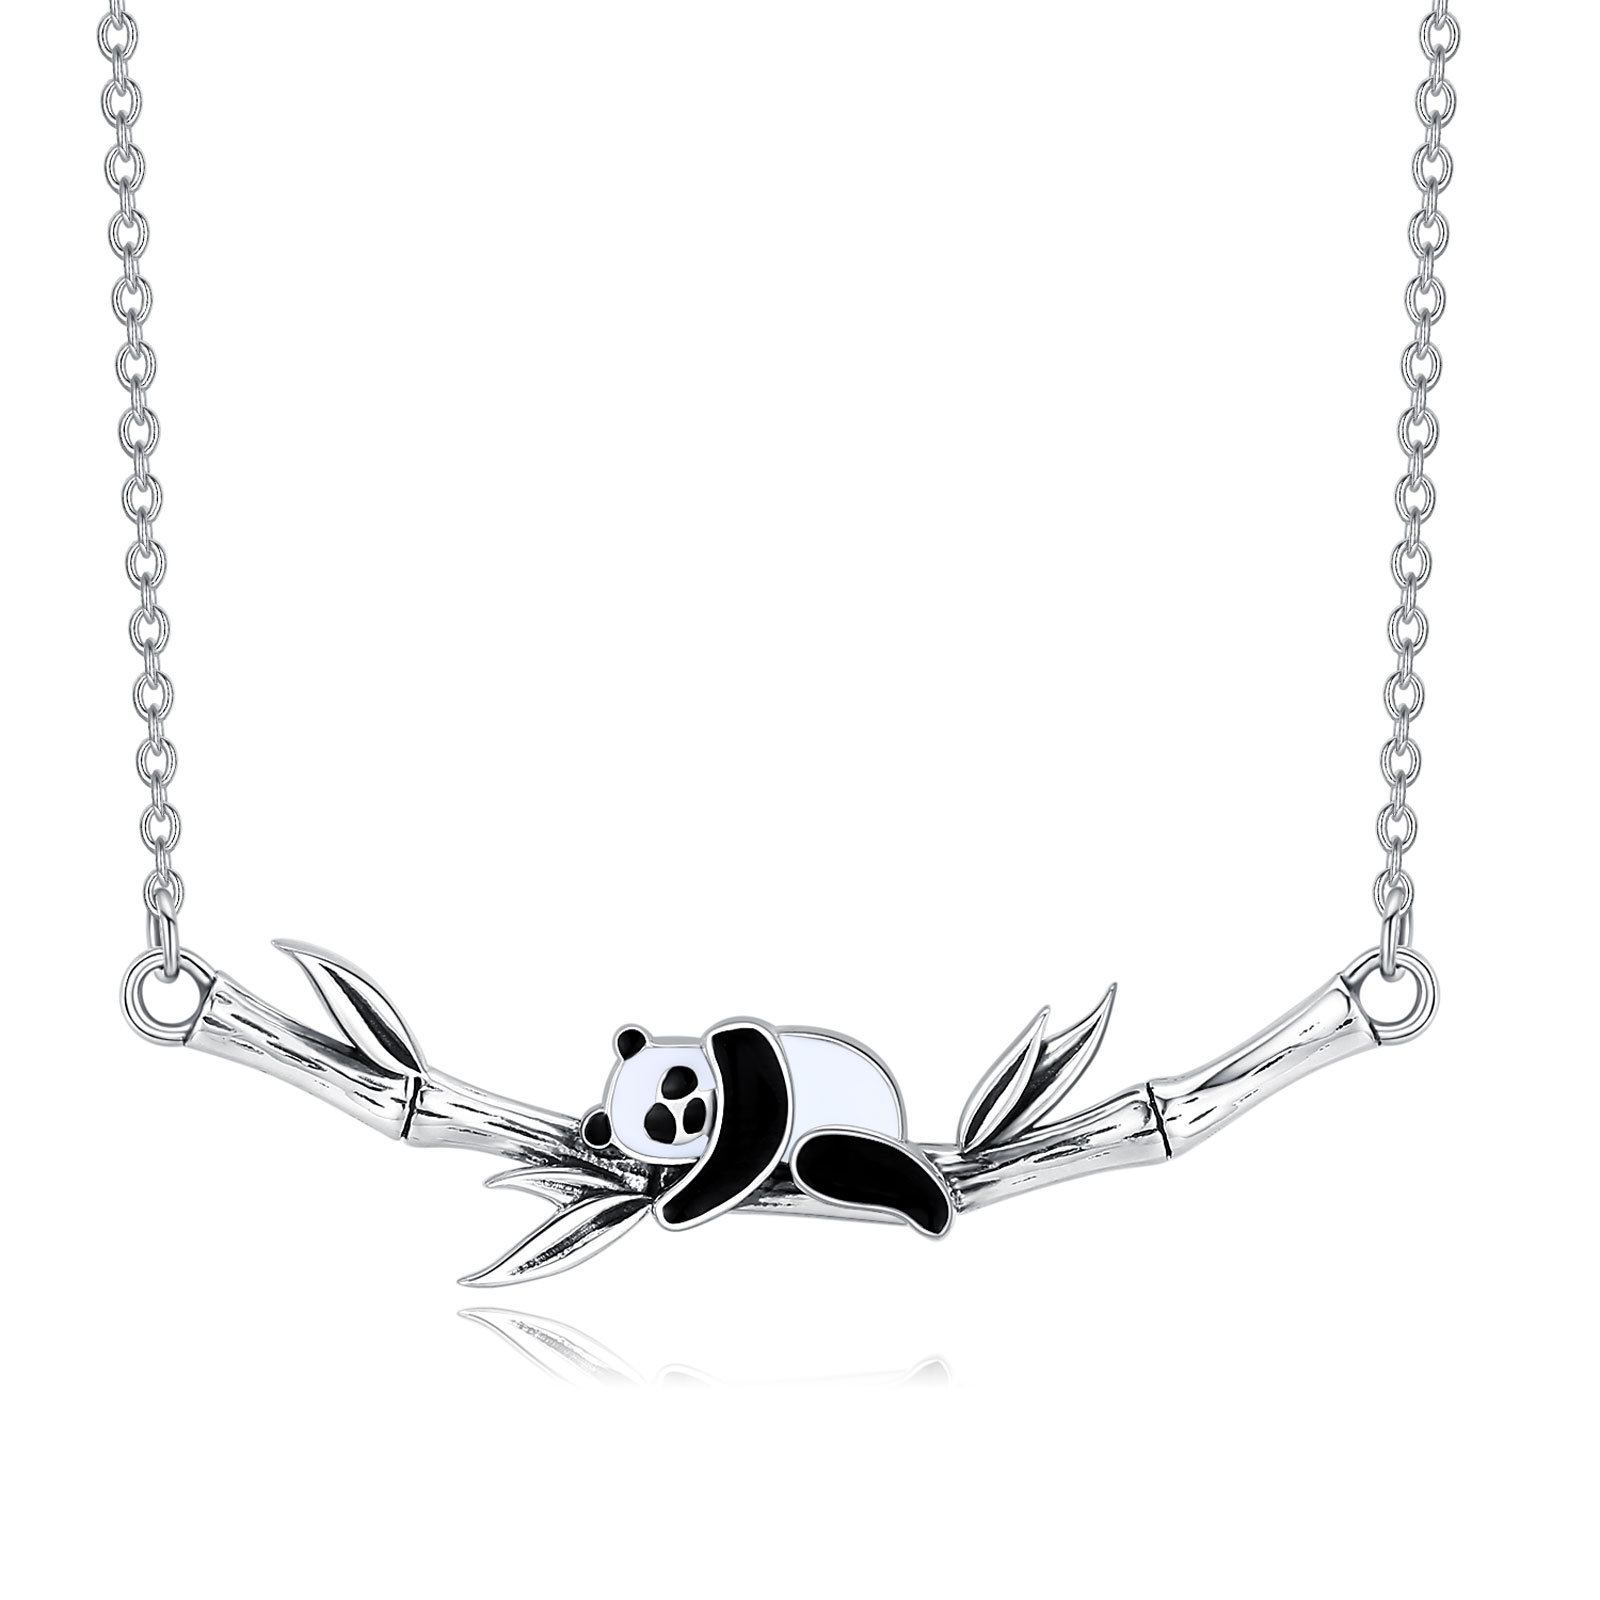 Merryshine Necklaces Fashionable S925 Sterling Silver Panda Smile Bamboo Clavicle Chain Necklace